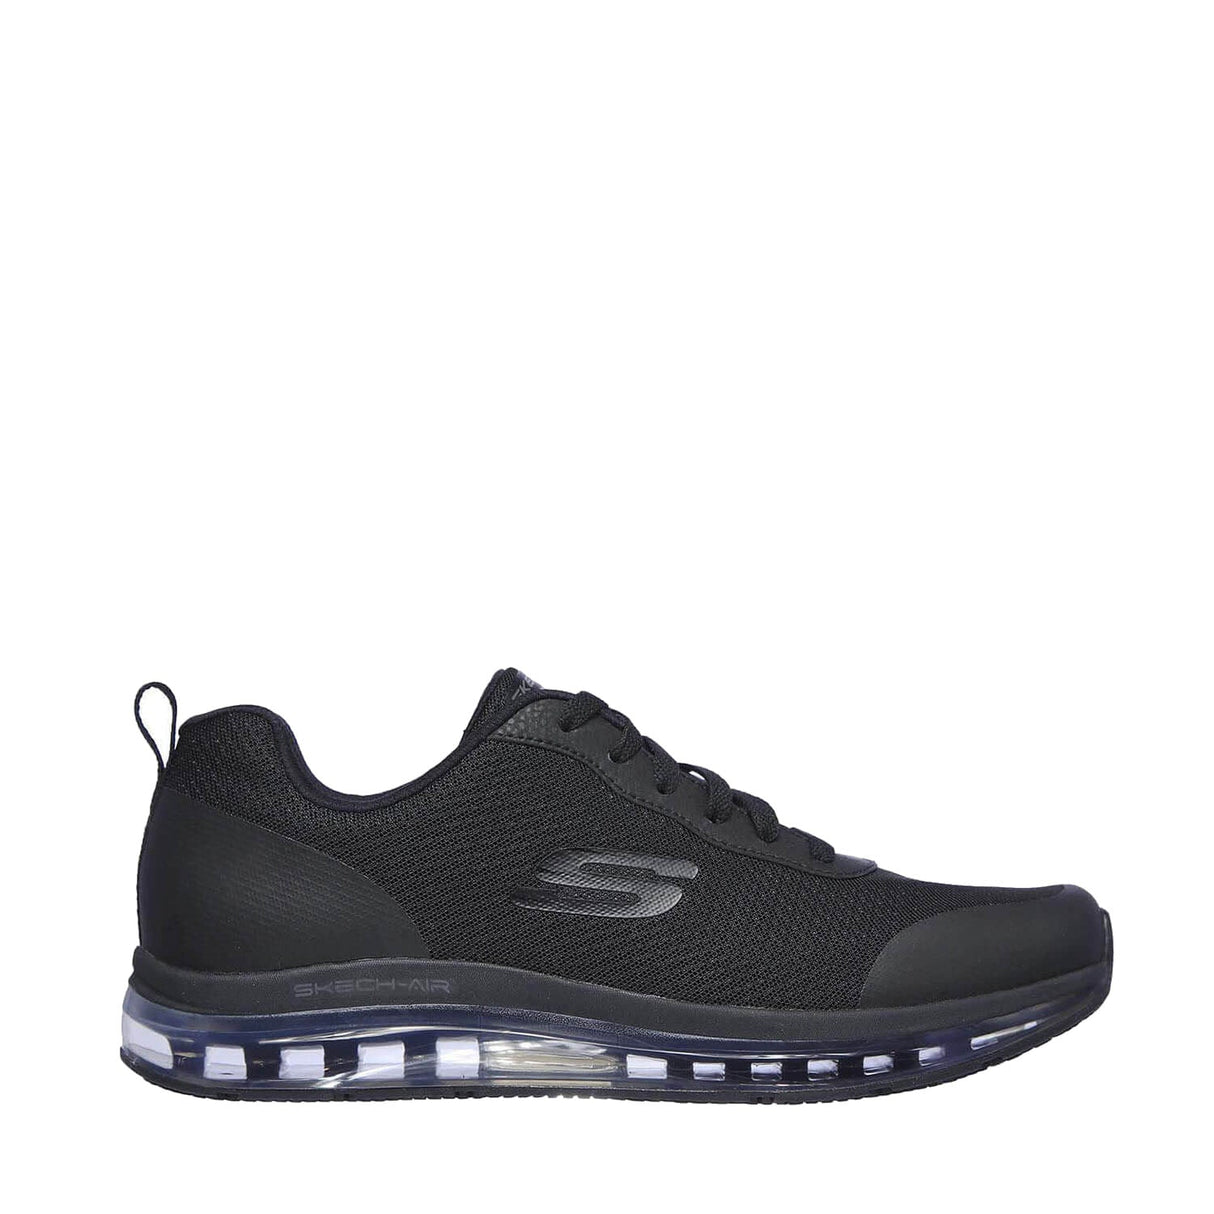 Skechers Relaxed Fit Skech-Air Chamness SR Shoe 77274-1